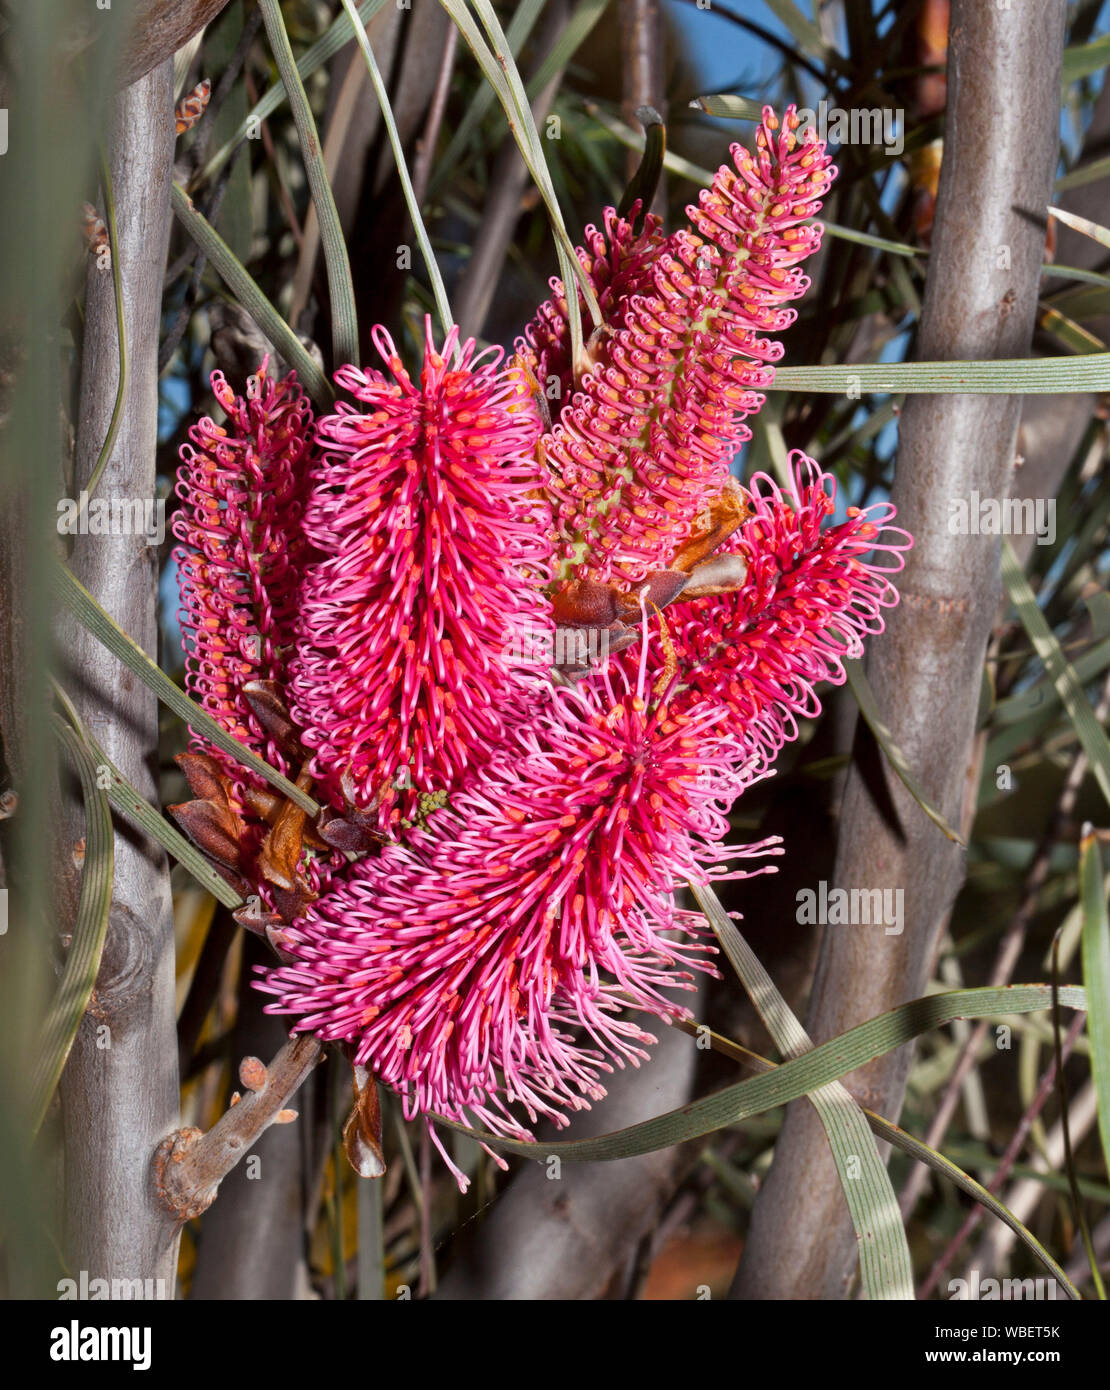 Cluster of spectacular deep pink / red flowers and green foliage of Hakea francisiana, grass leaved hakea - Australian wildflowers Stock Photo